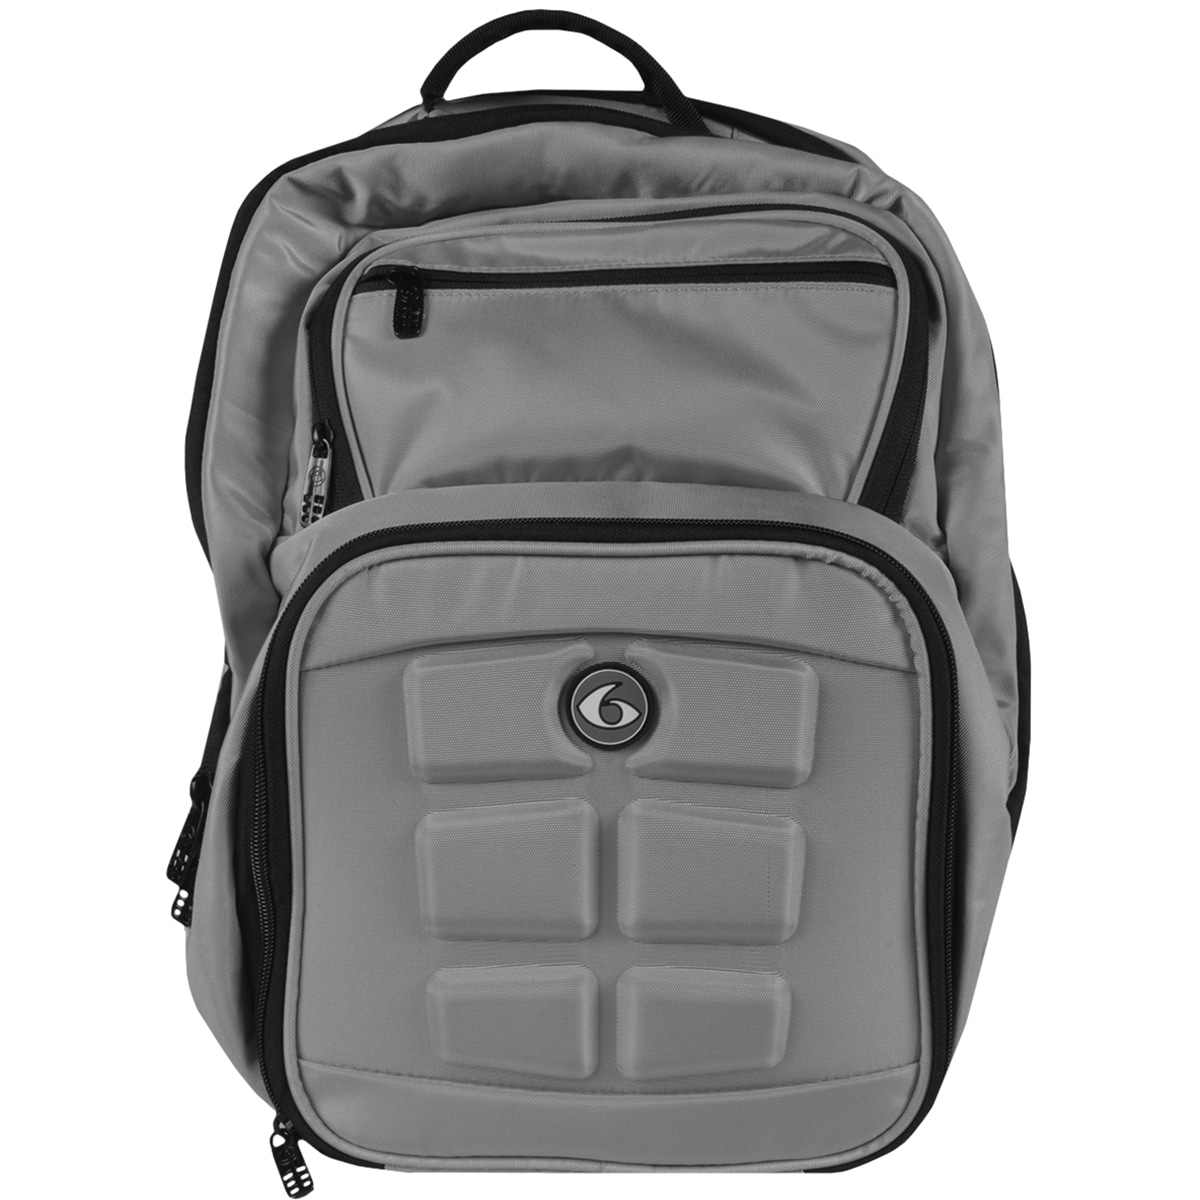 https://ak1.ostkcdn.com/images/products/is/images/direct/52adf7e50b08469cc3679675353066f42e1f5cda/6-Pack-Fitness-Expedition-300-Meal-Management-Backpack---Gray-Black.jpg